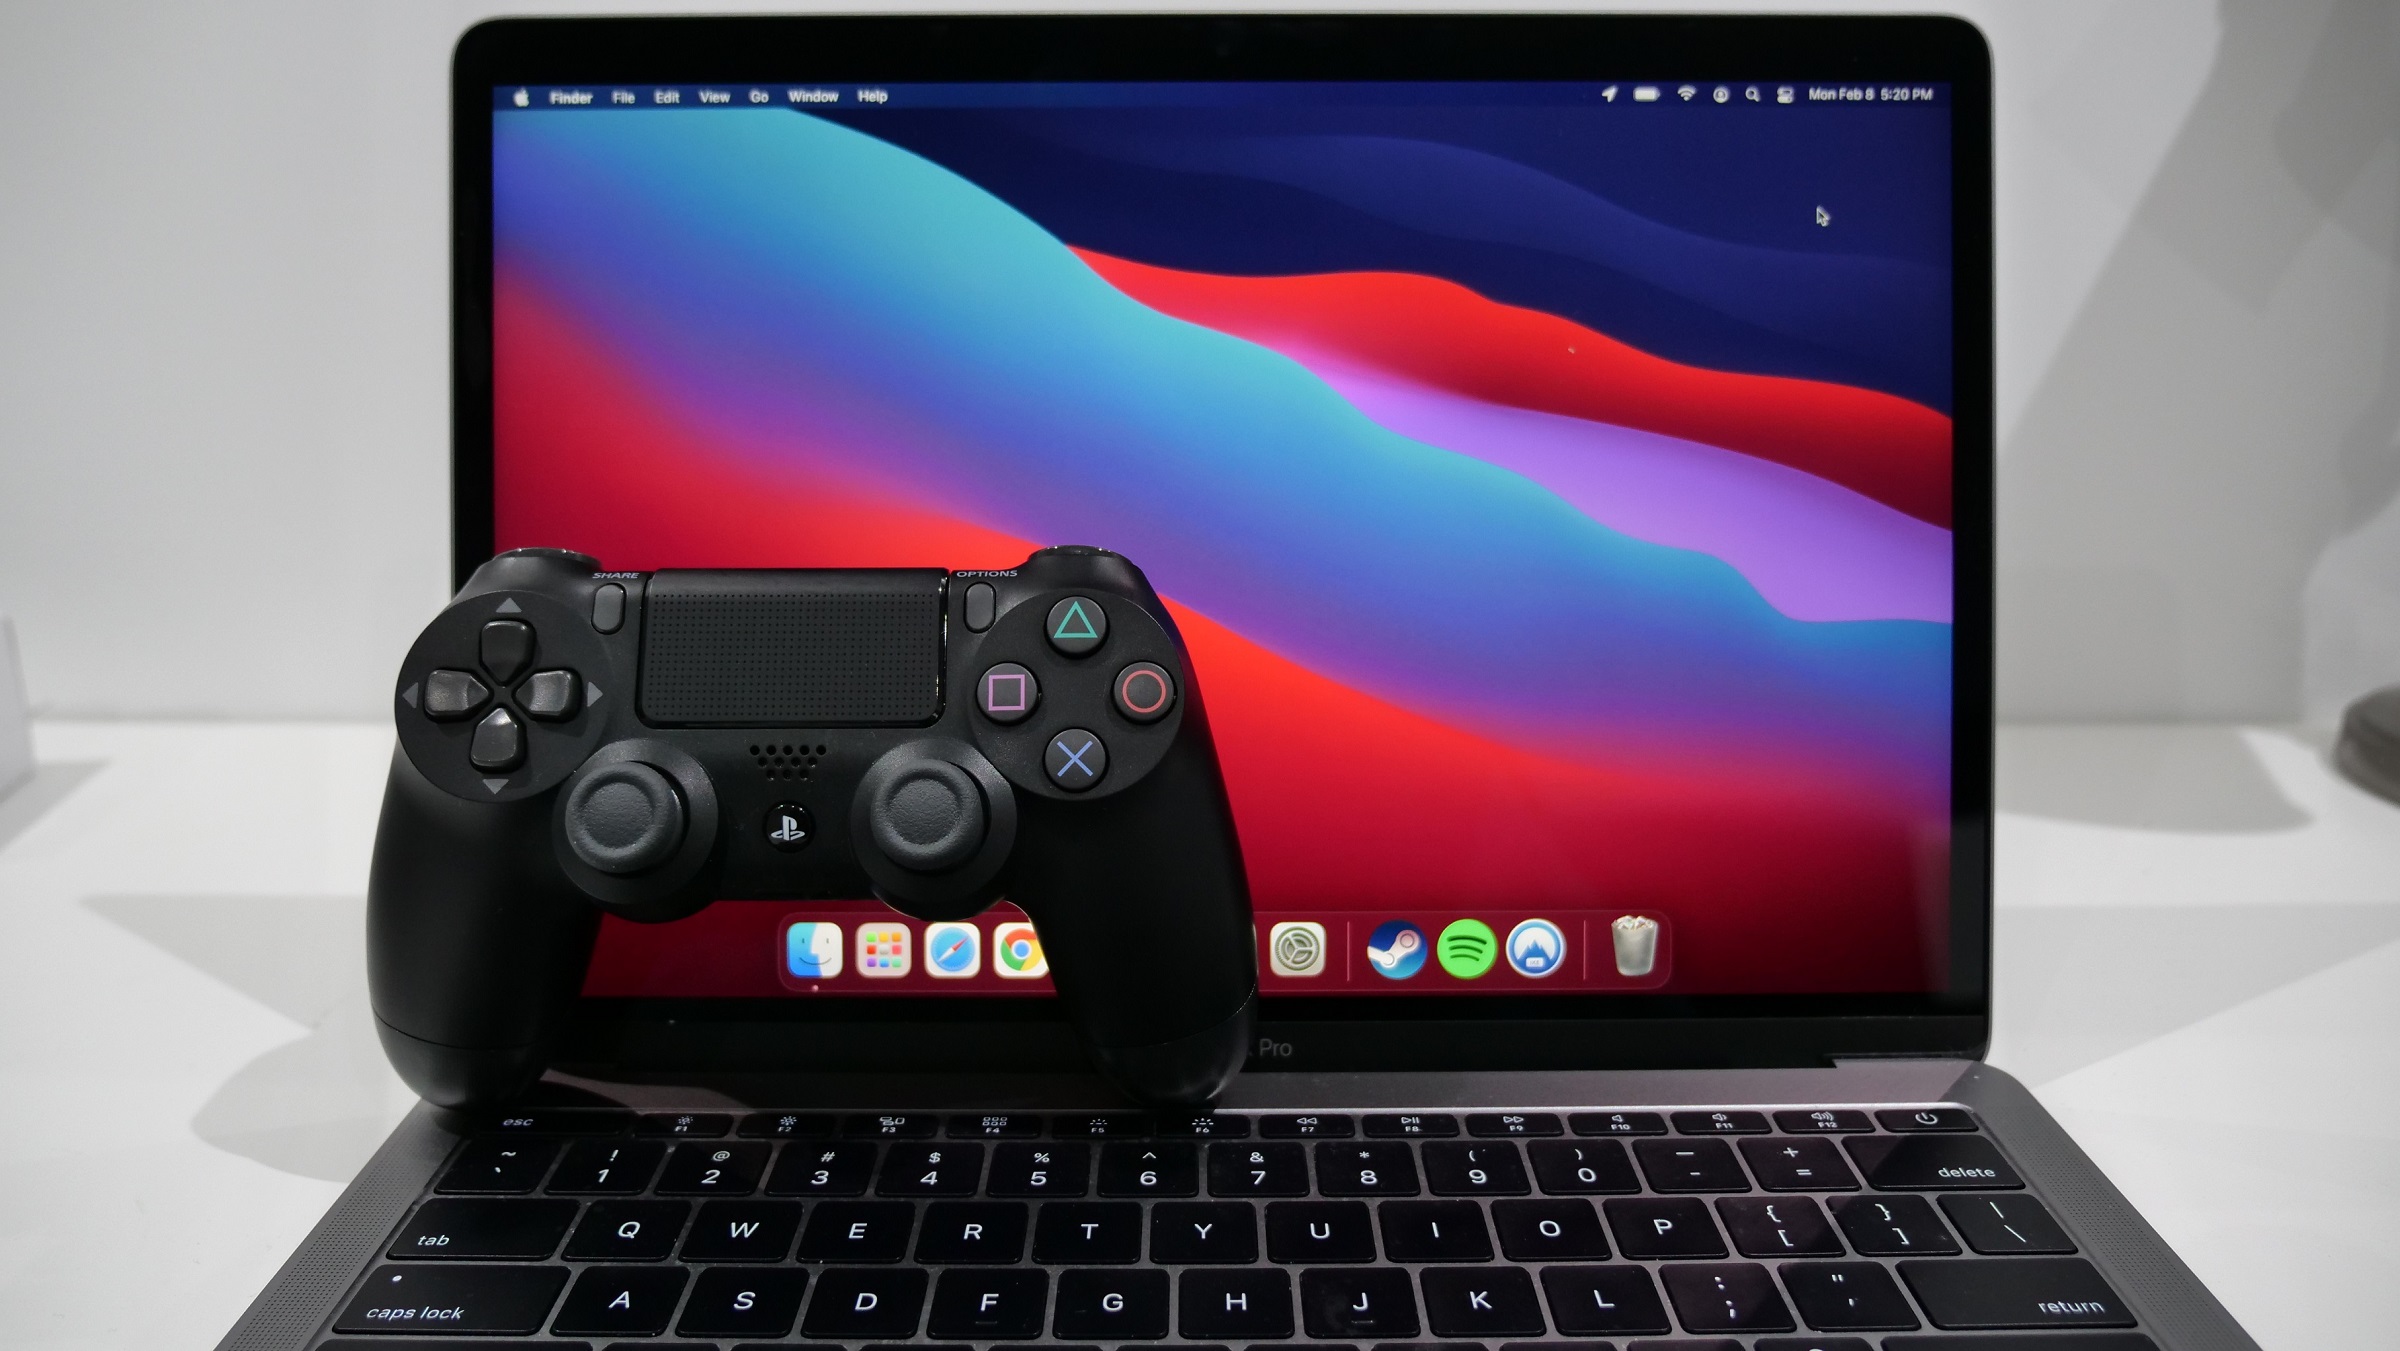 connect ps4 controller to usb adapter for mac